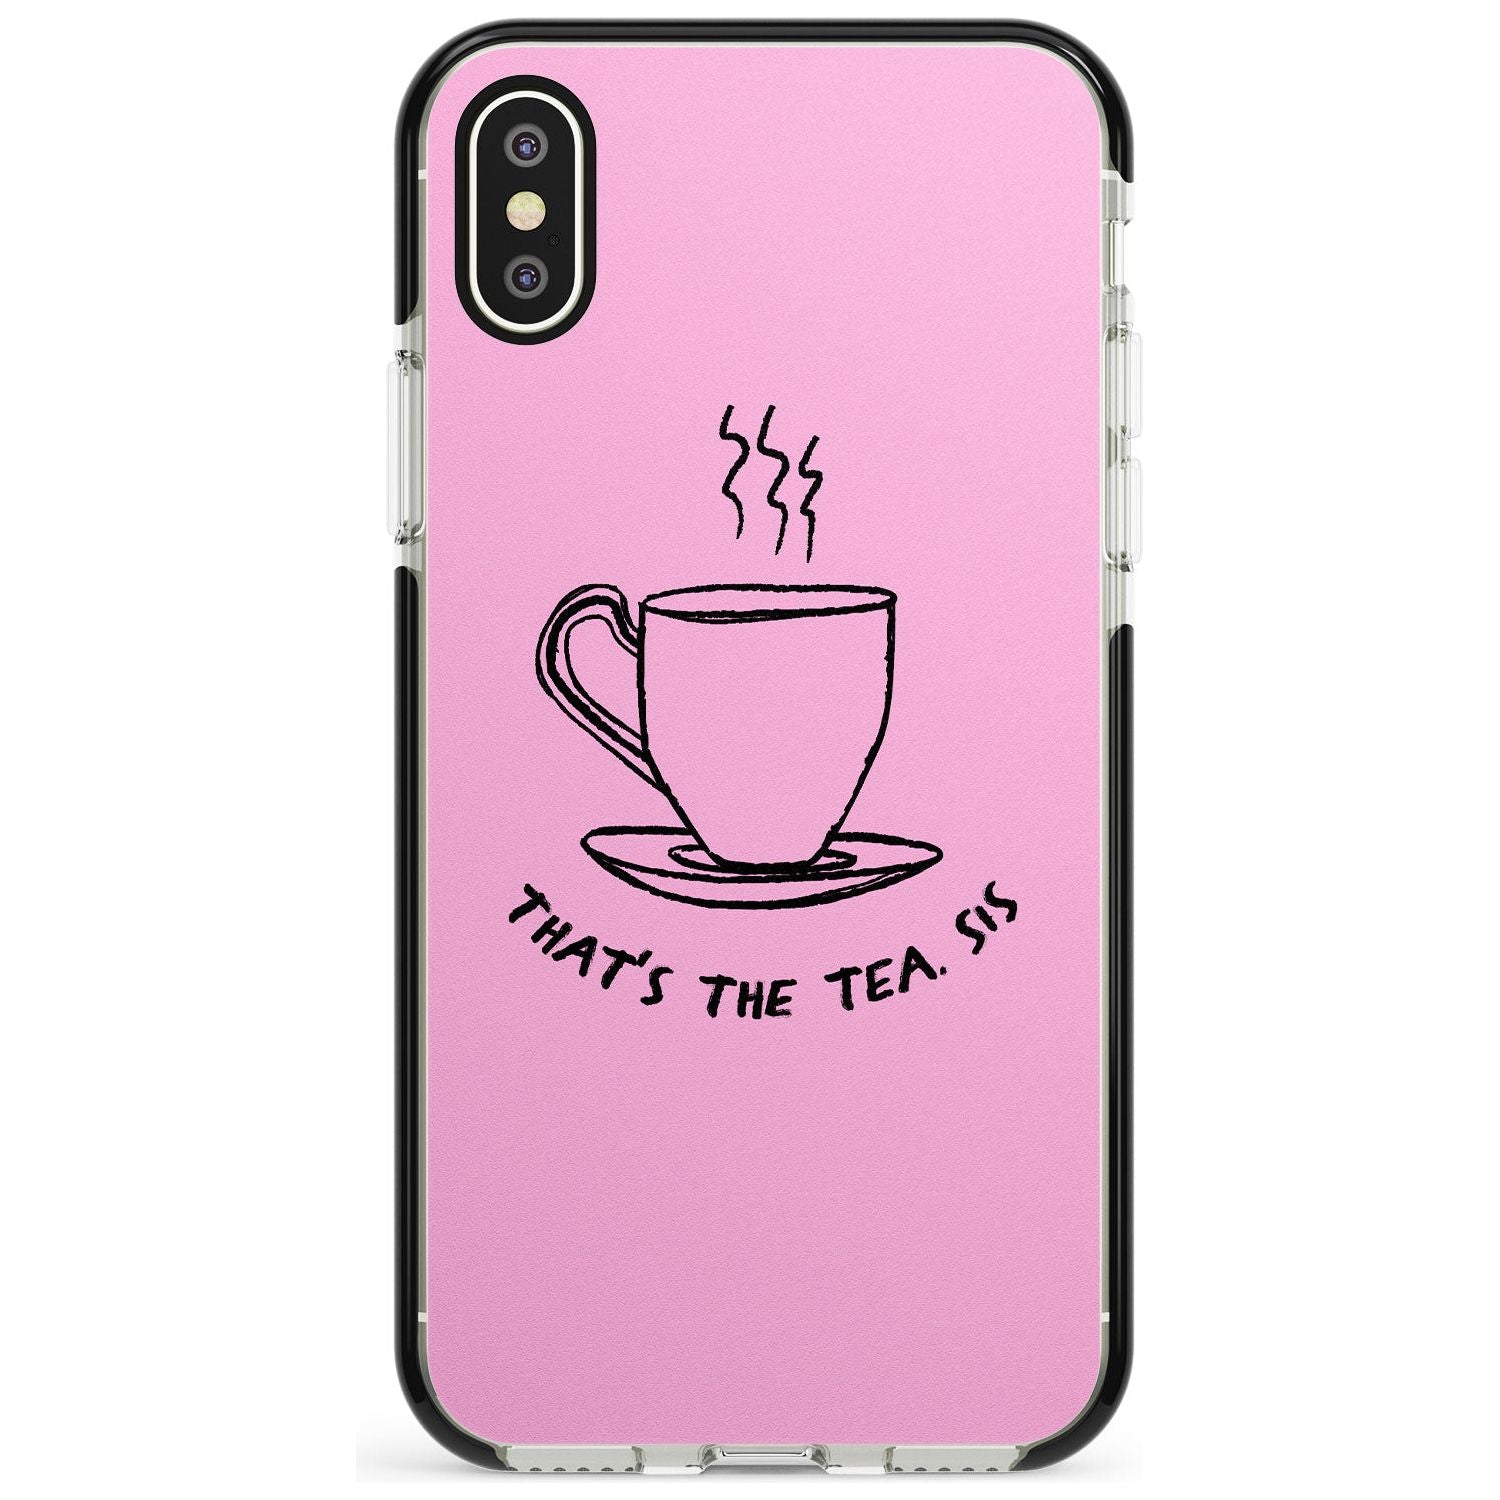 That's the Tea, Sis Pink Black Impact Phone Case for iPhone X XS Max XR